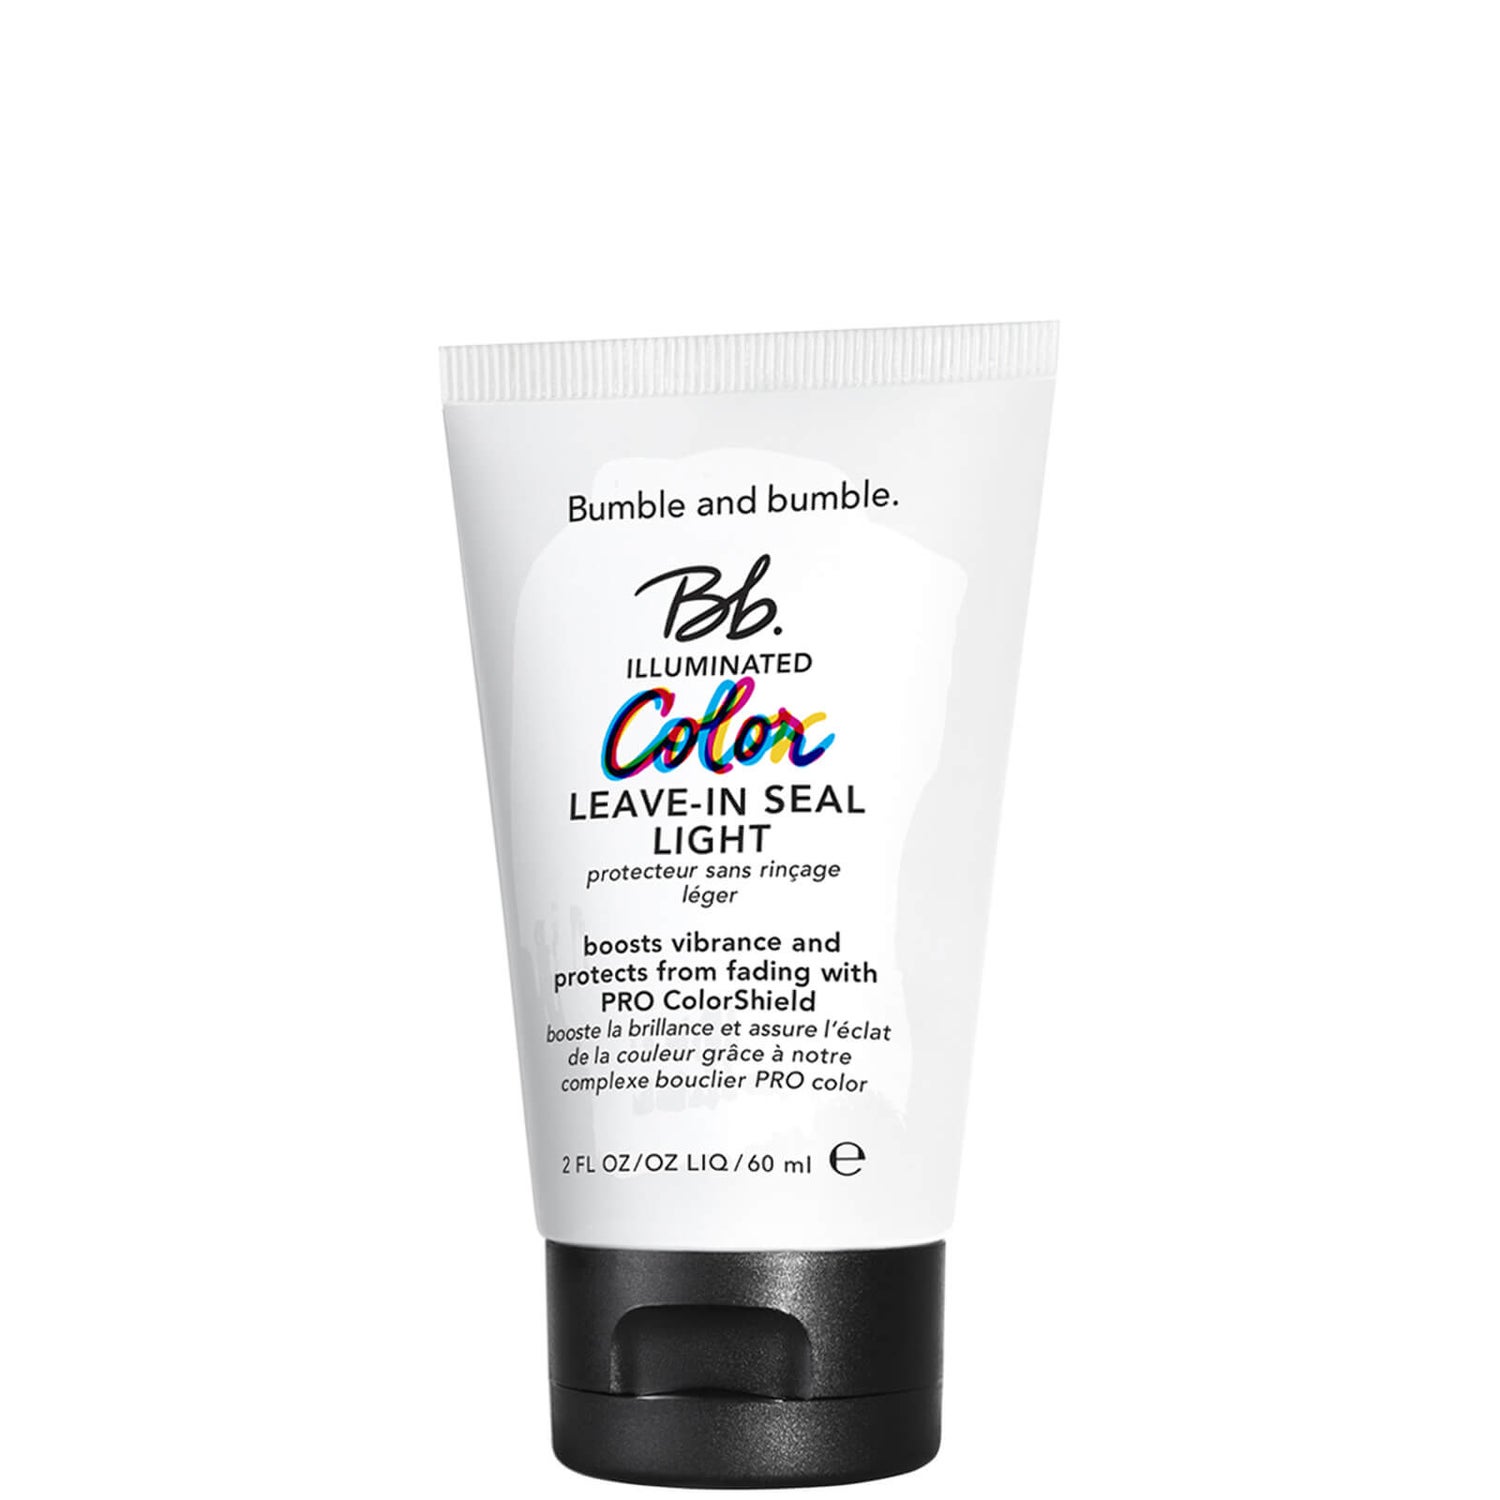 Bumble and bumble Illuminated Color Travel Size Vibrancy Seal Leave-in Light Conditioner 60ml